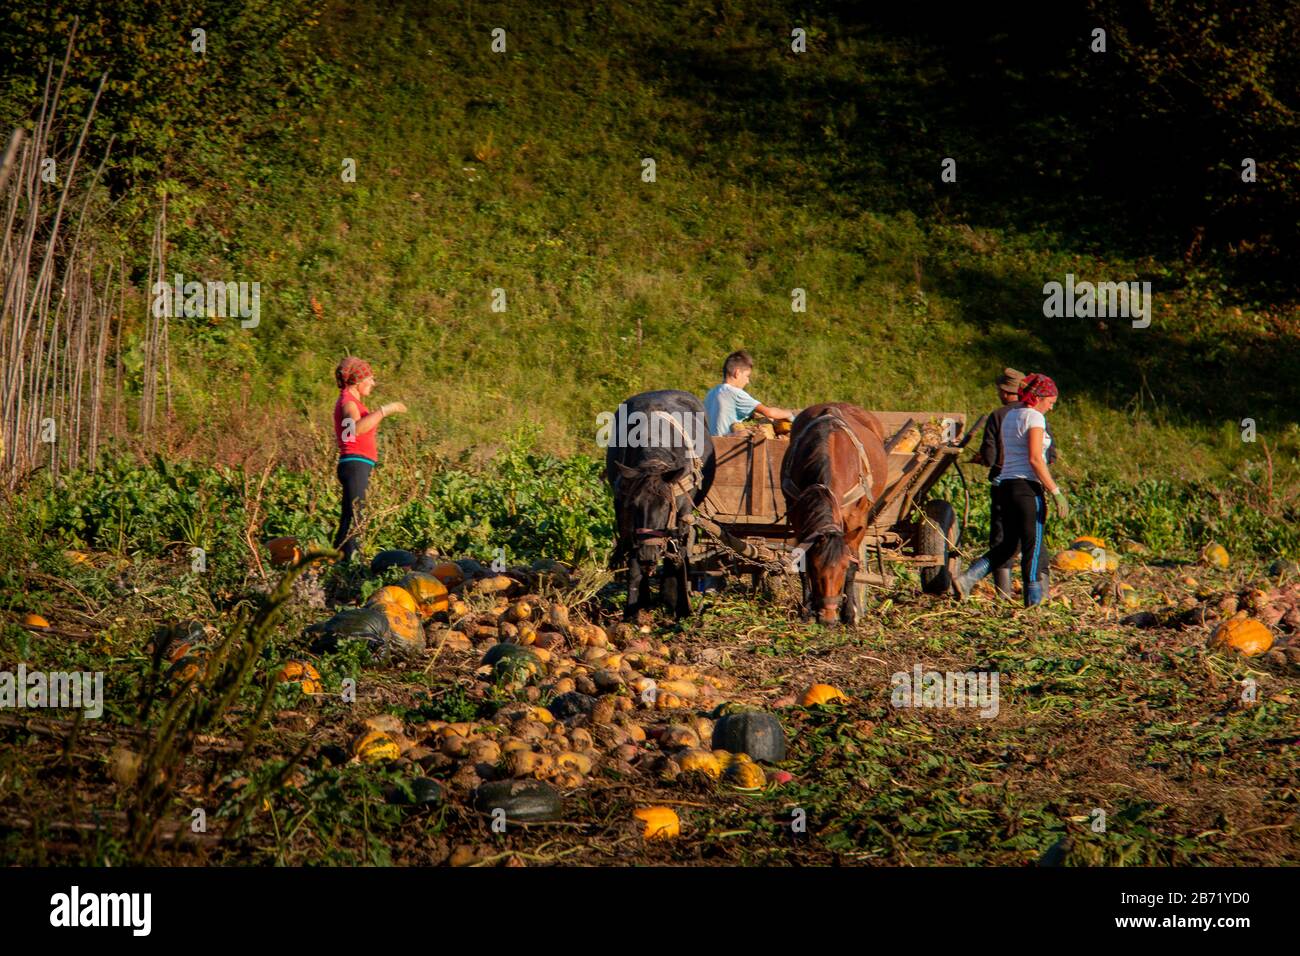 MARAMURES, ROMANIA - OCTOBER 10, 2014: unknown people work with carts and horses in the Maramures region, the isolated Carpathian region of Romania, i Stock Photo